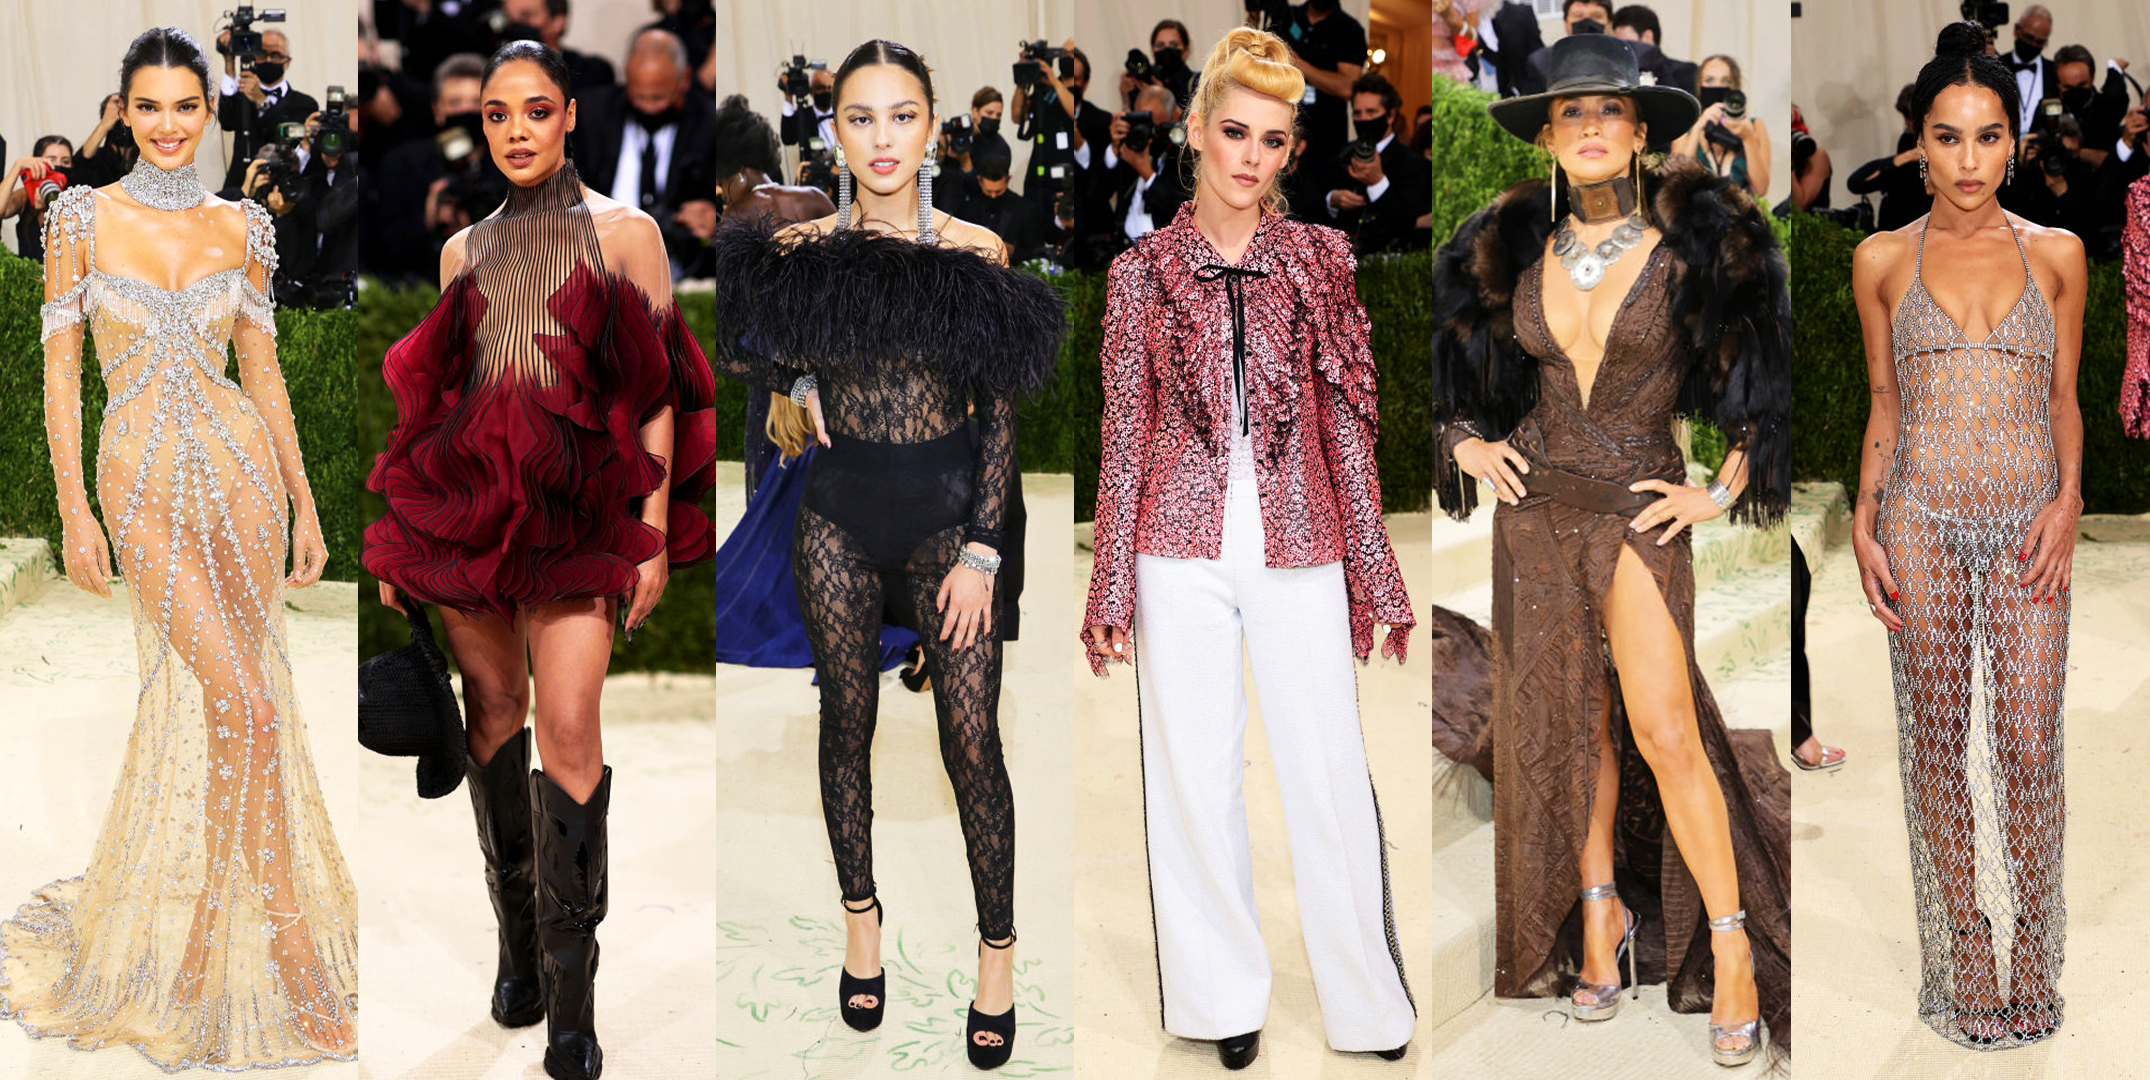 Met Gala 2022: Best and Worst Looks - The New York Times